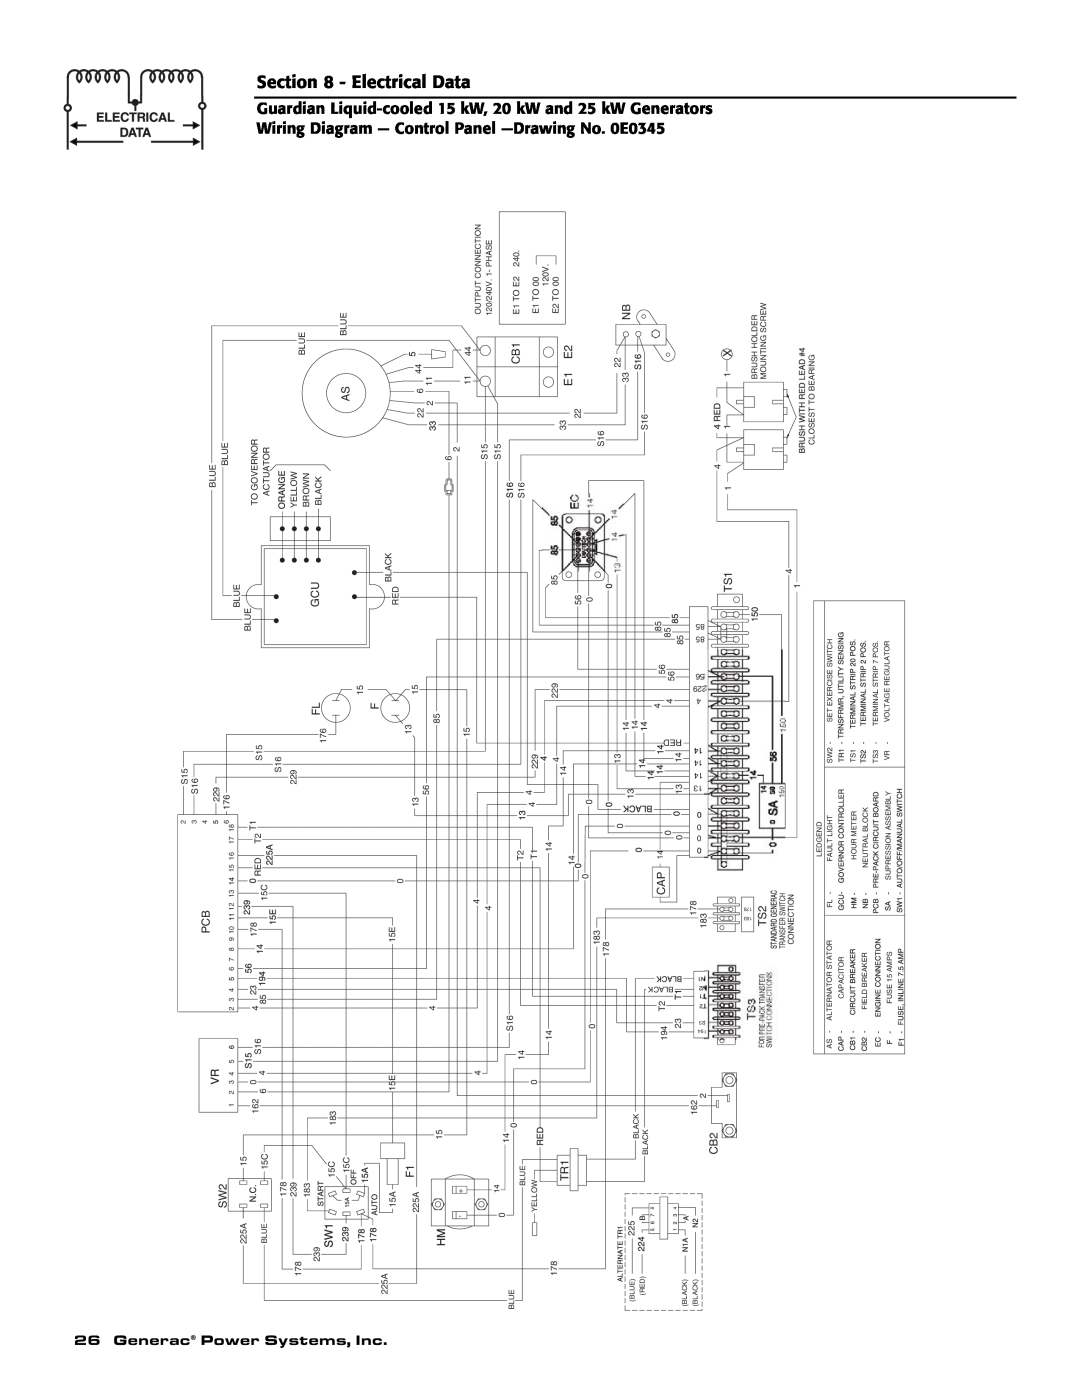 Guardian Technologies 004723-0 Section, Wiring Diagram, GuardianLiquid, cooled 15 Control, kW, 20 kW and, No. 0E0345 